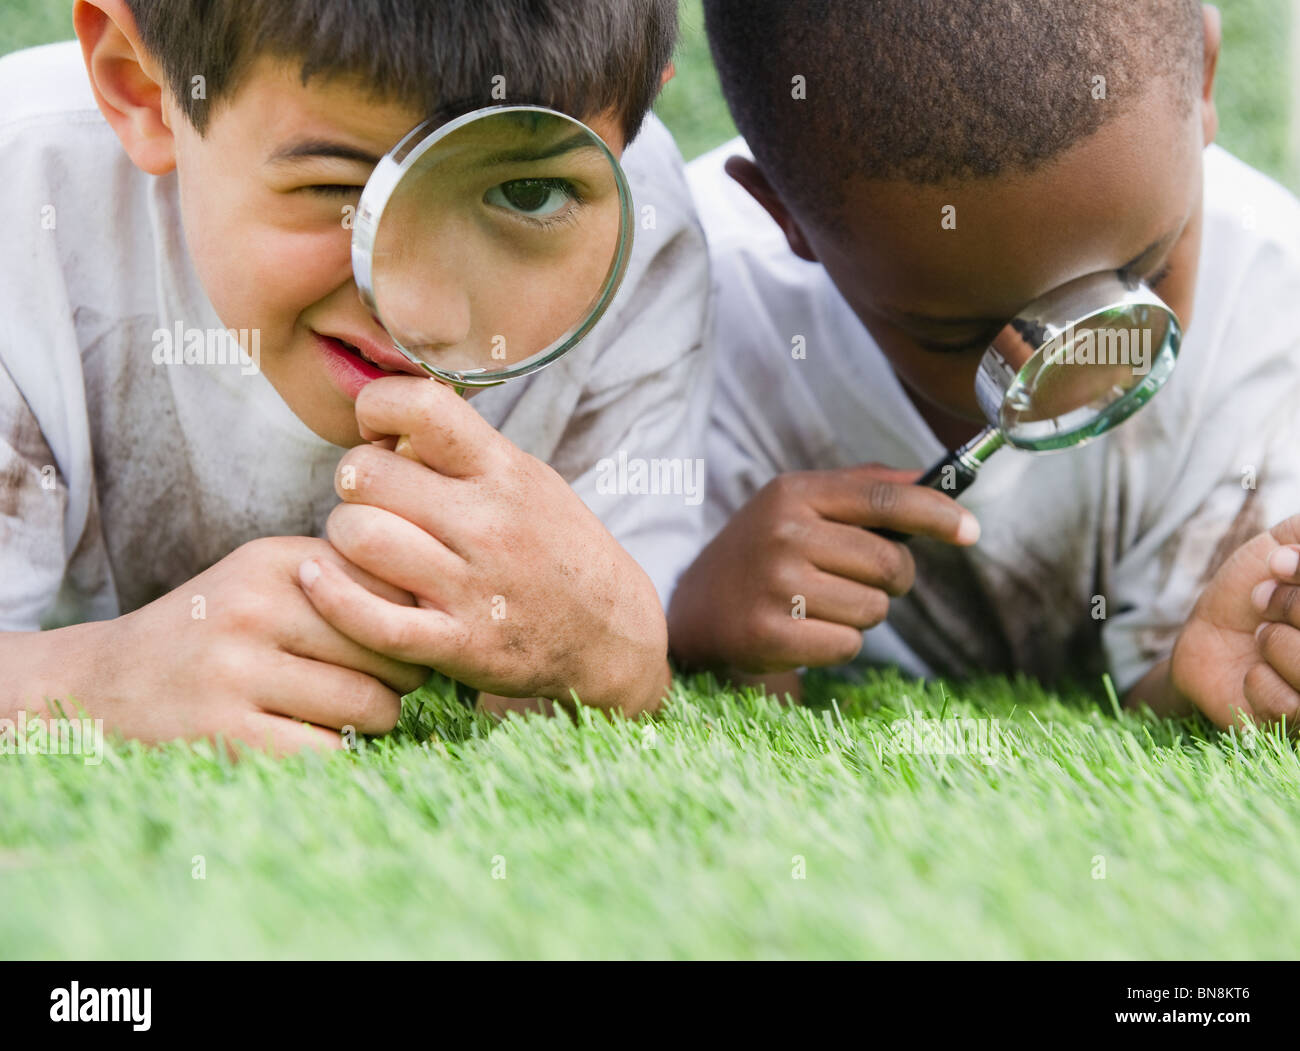 Boys looking at grass through magnifying glasses Stock Photo